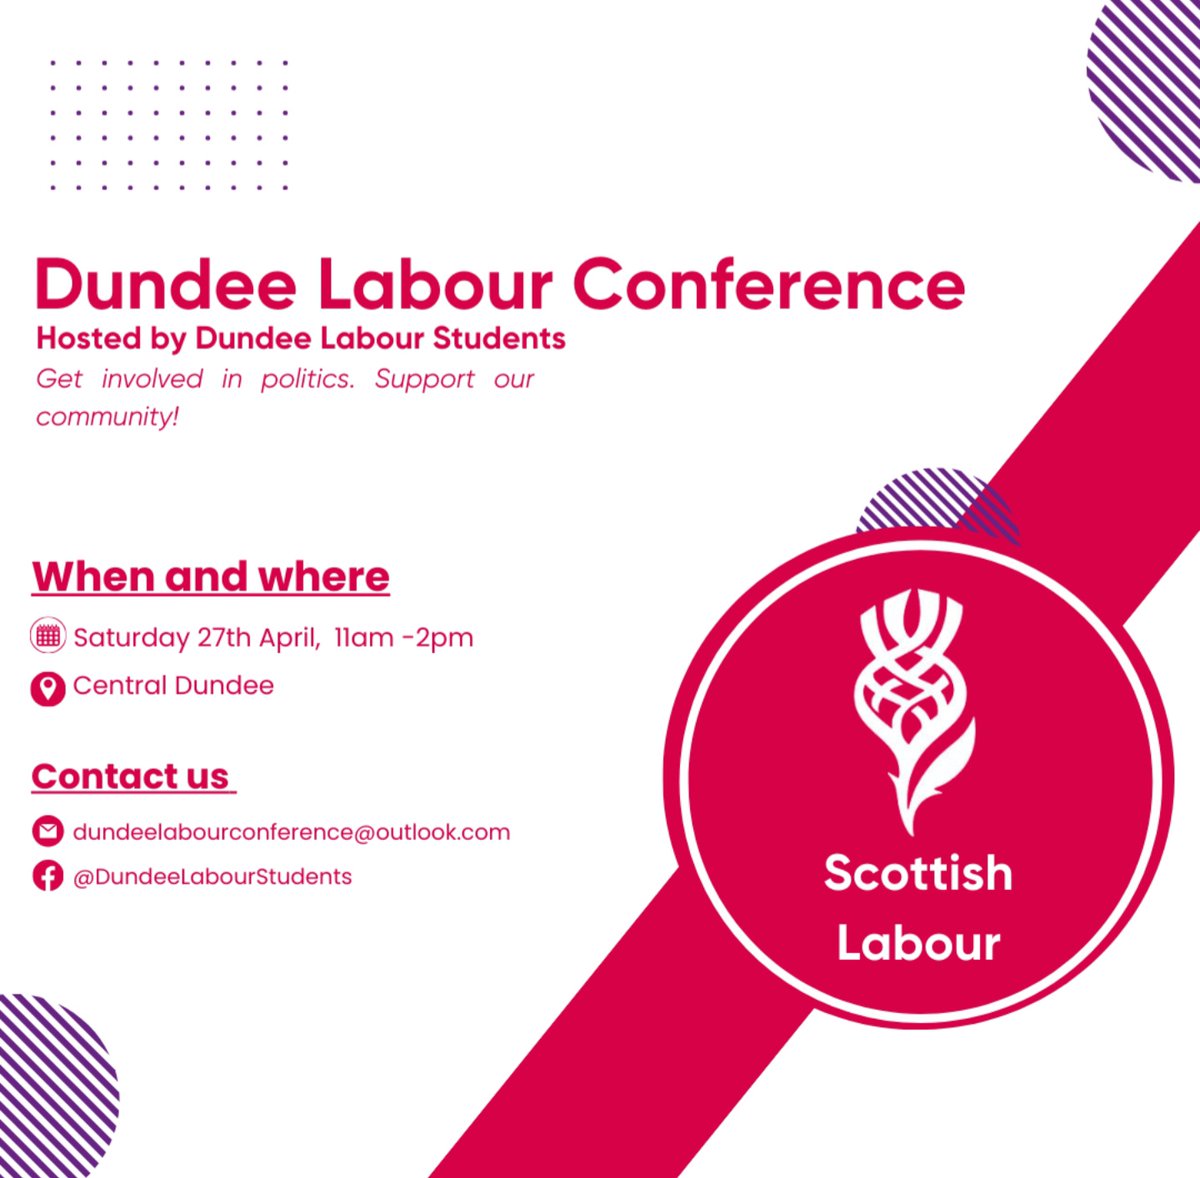 We are pleased to announce, alongside @DundeeLabour, that we are organising a Dundee Labour Conference. This isn’t a regular conference with motions and delegates but a more fun fast-paced event aimed at encouraging involvement in politics.